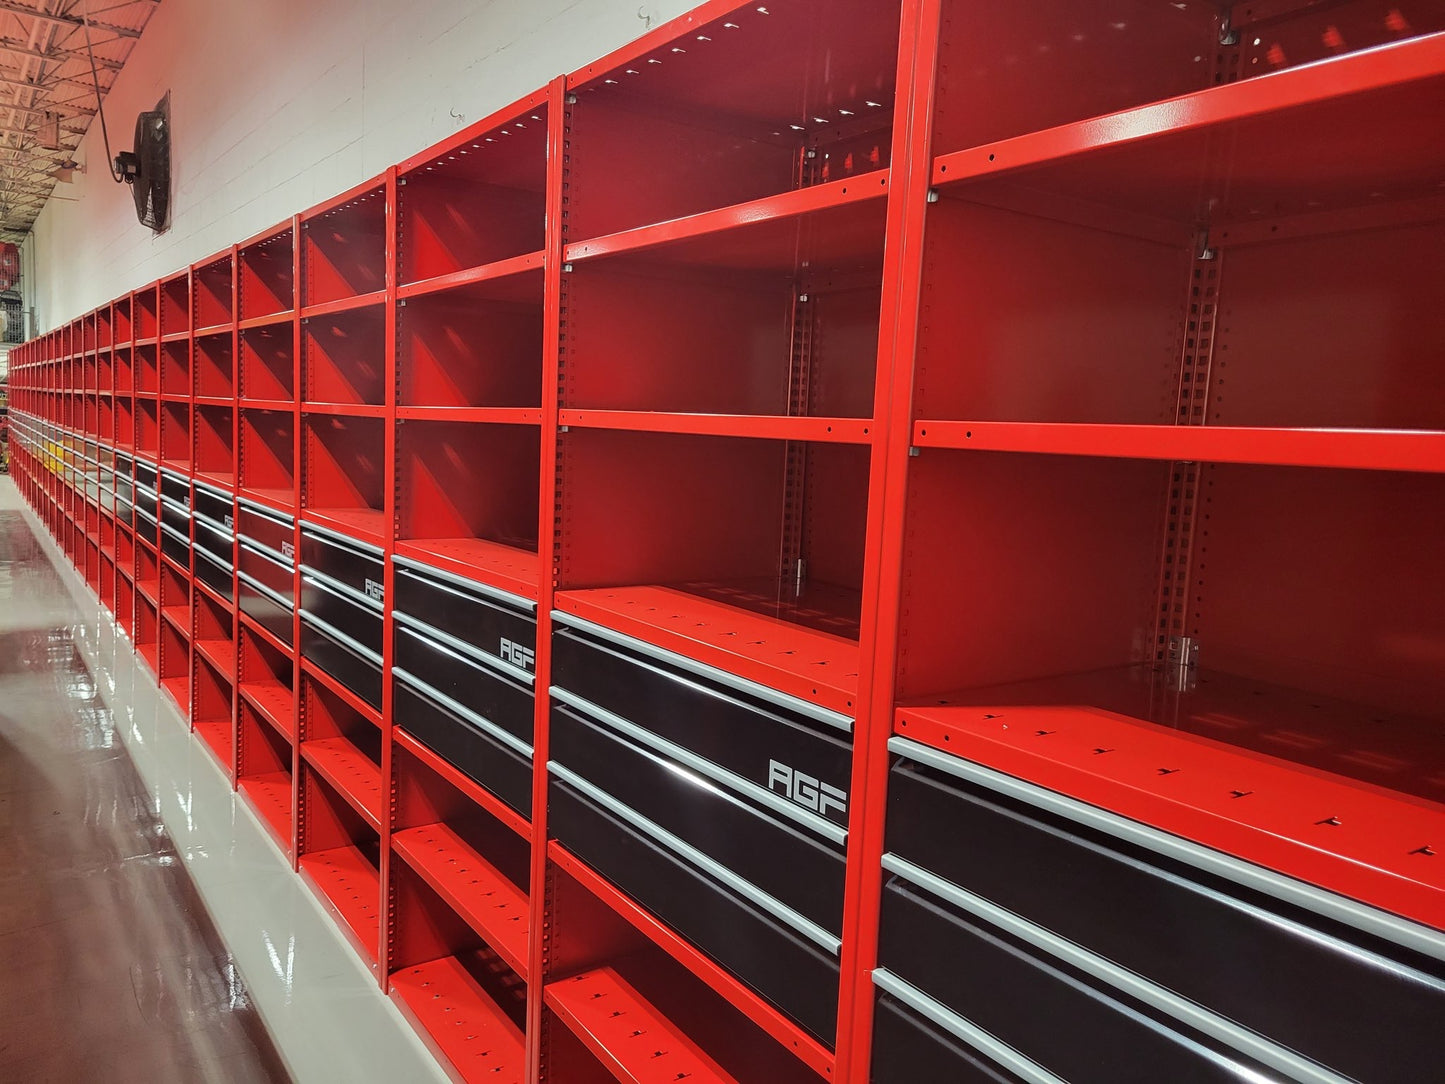 Shelving system 99 height x 48 width x 24 depth | Option: Open / Closed